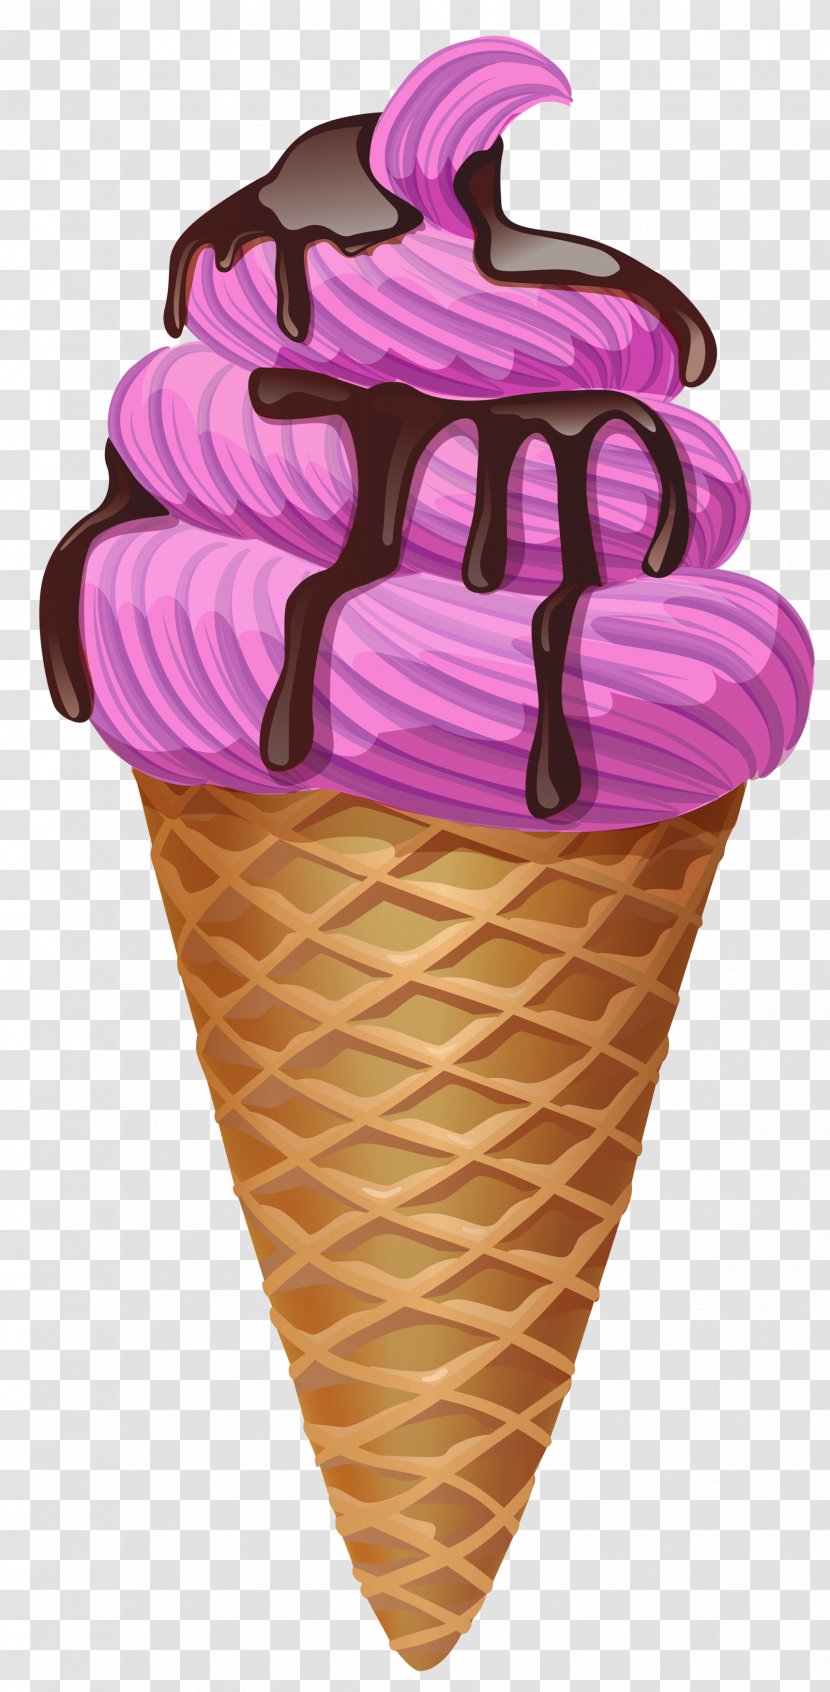 Ice Cream Cones Chocolate Waffle - Syrup - Treats Transparent PNG